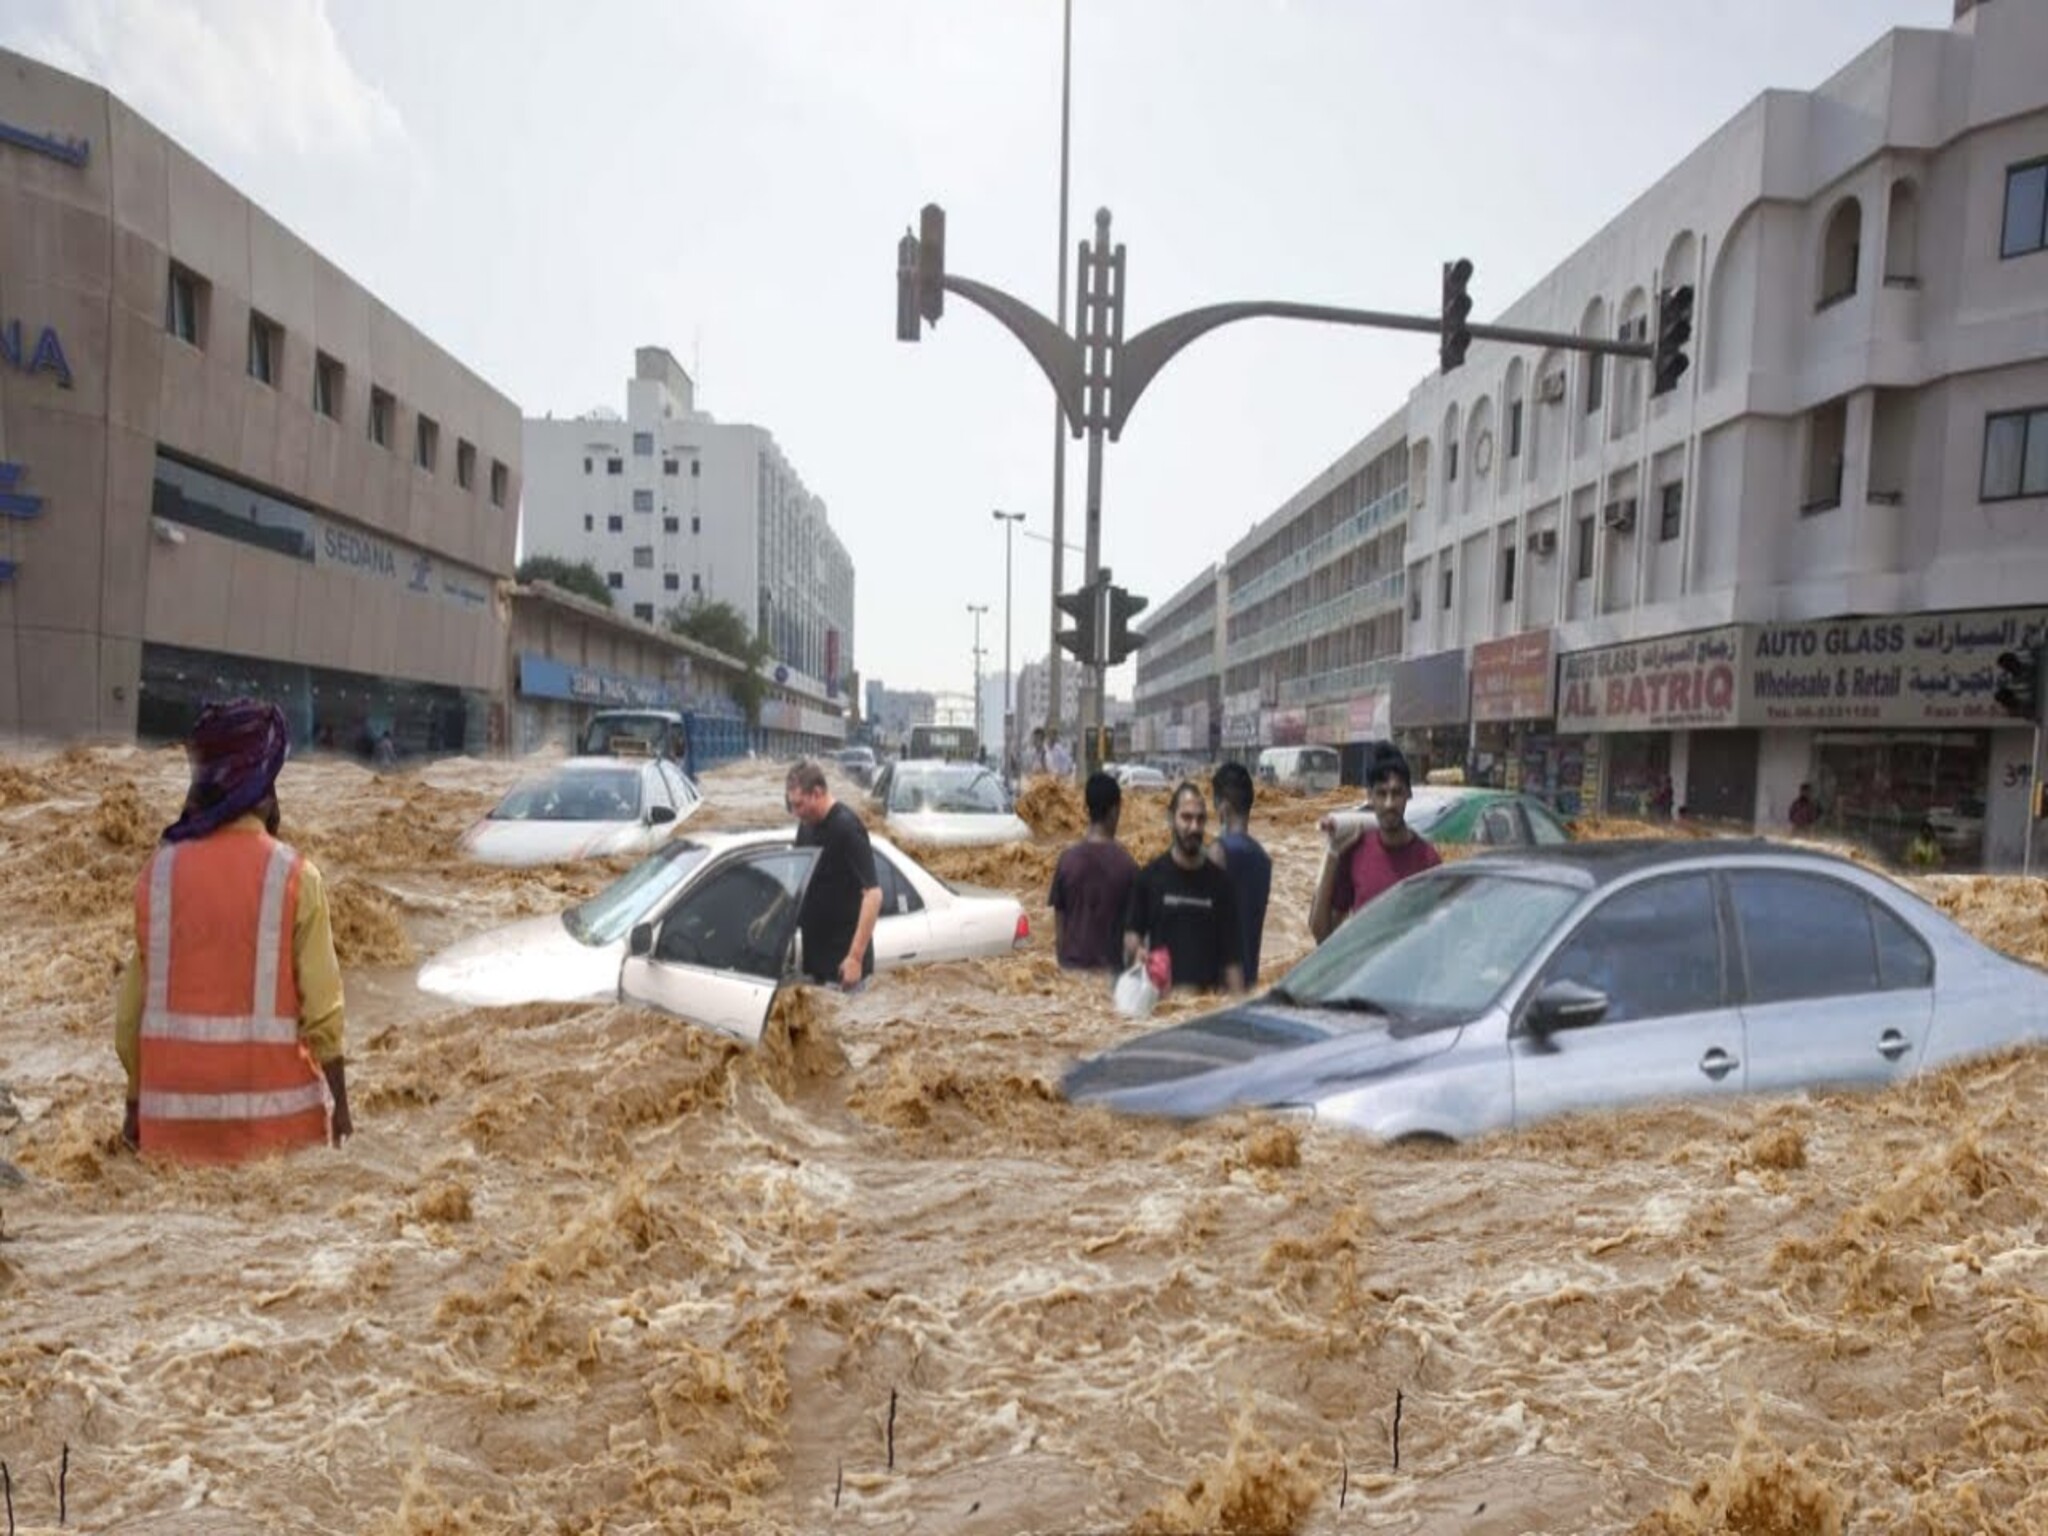 UAE: The Meteorological Center warns of heavy thunderstorms in the Emirates, causing floods